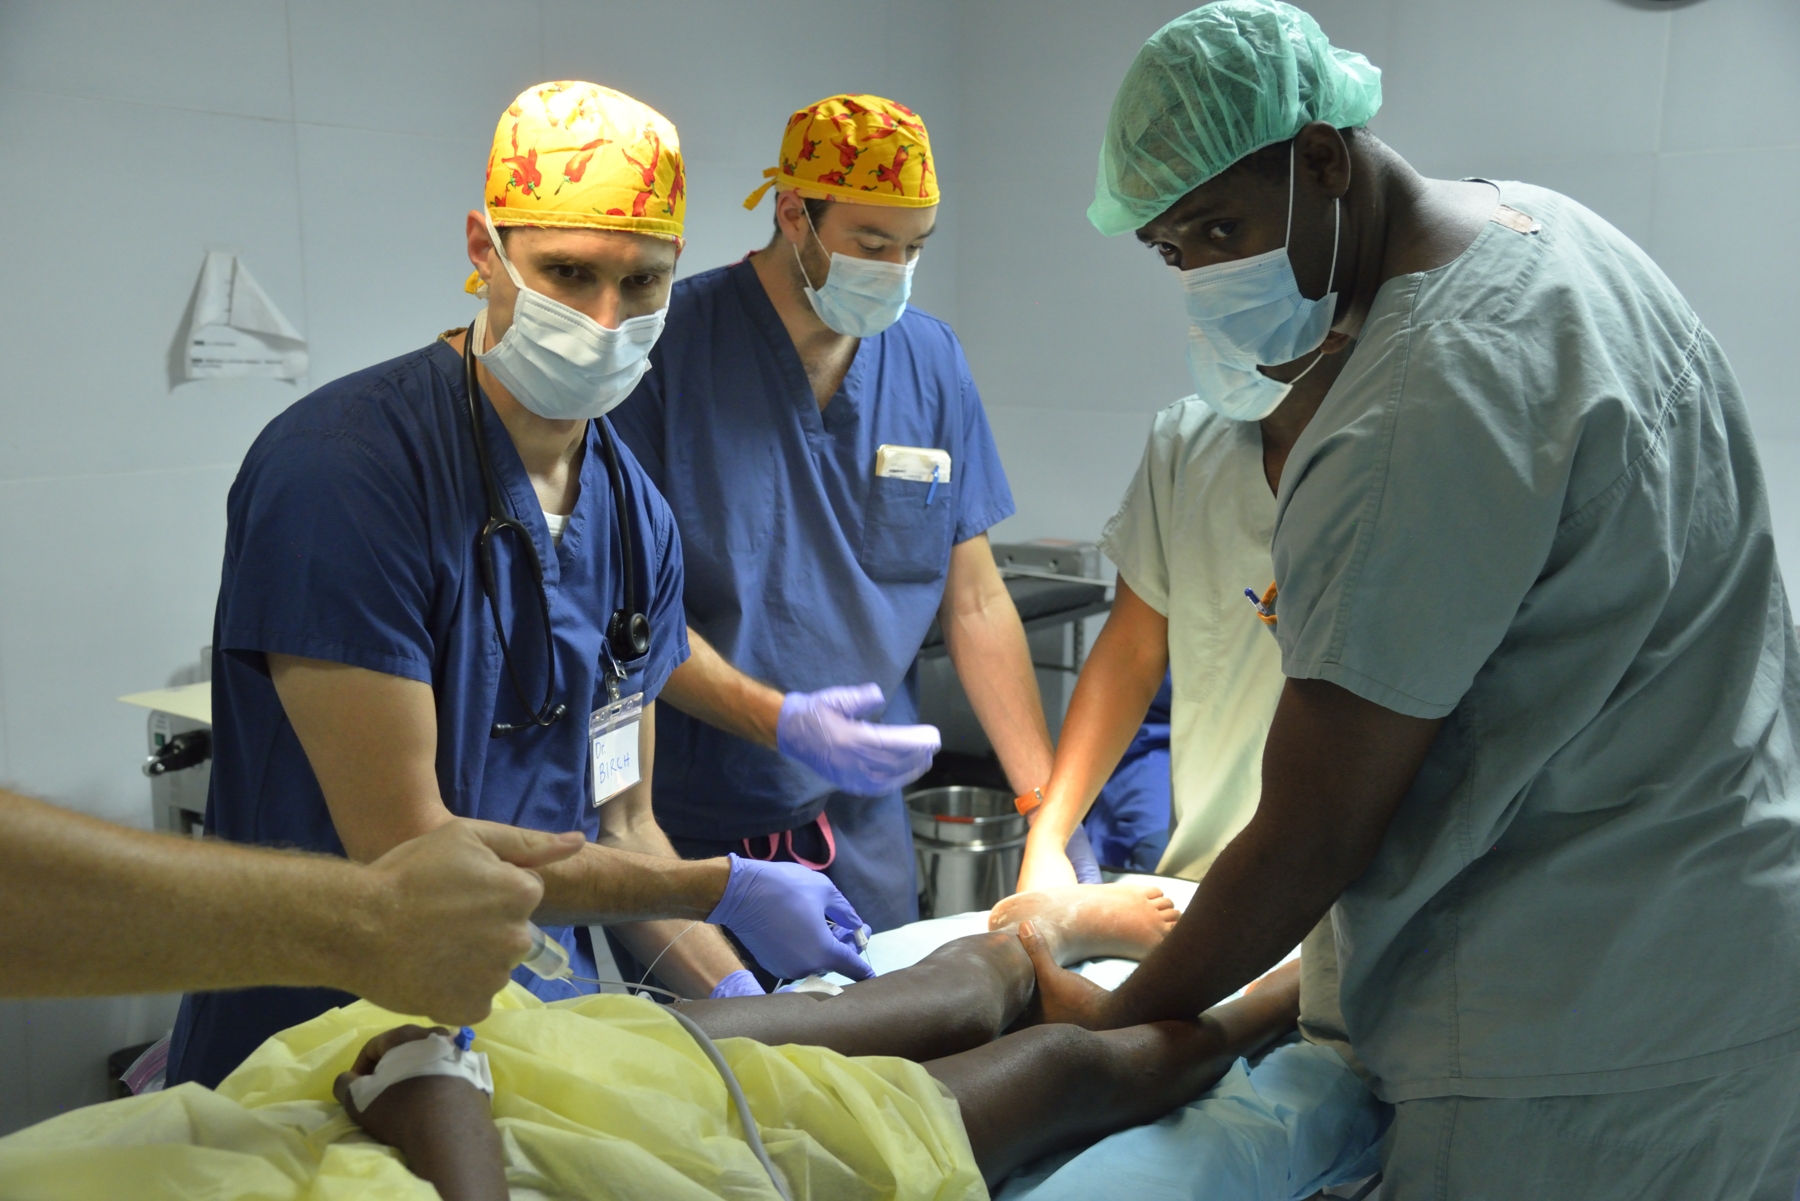 A dedicated group of surgeons providing medical care to underserved communities.